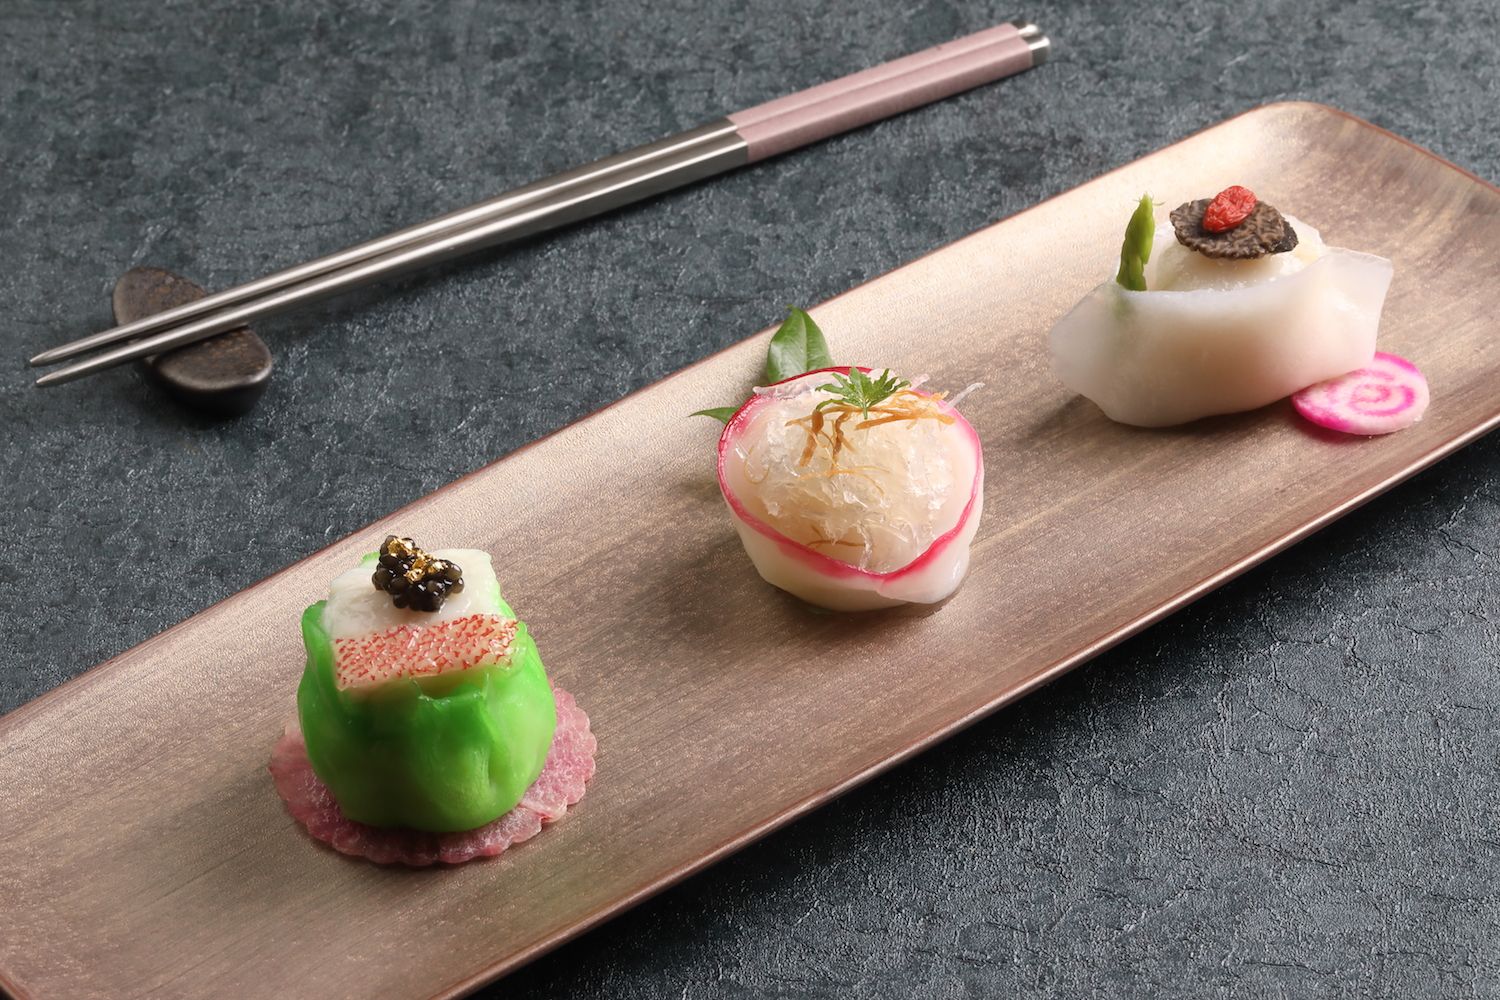 Hung Tong delights with dim sum and reimagined classics this summer